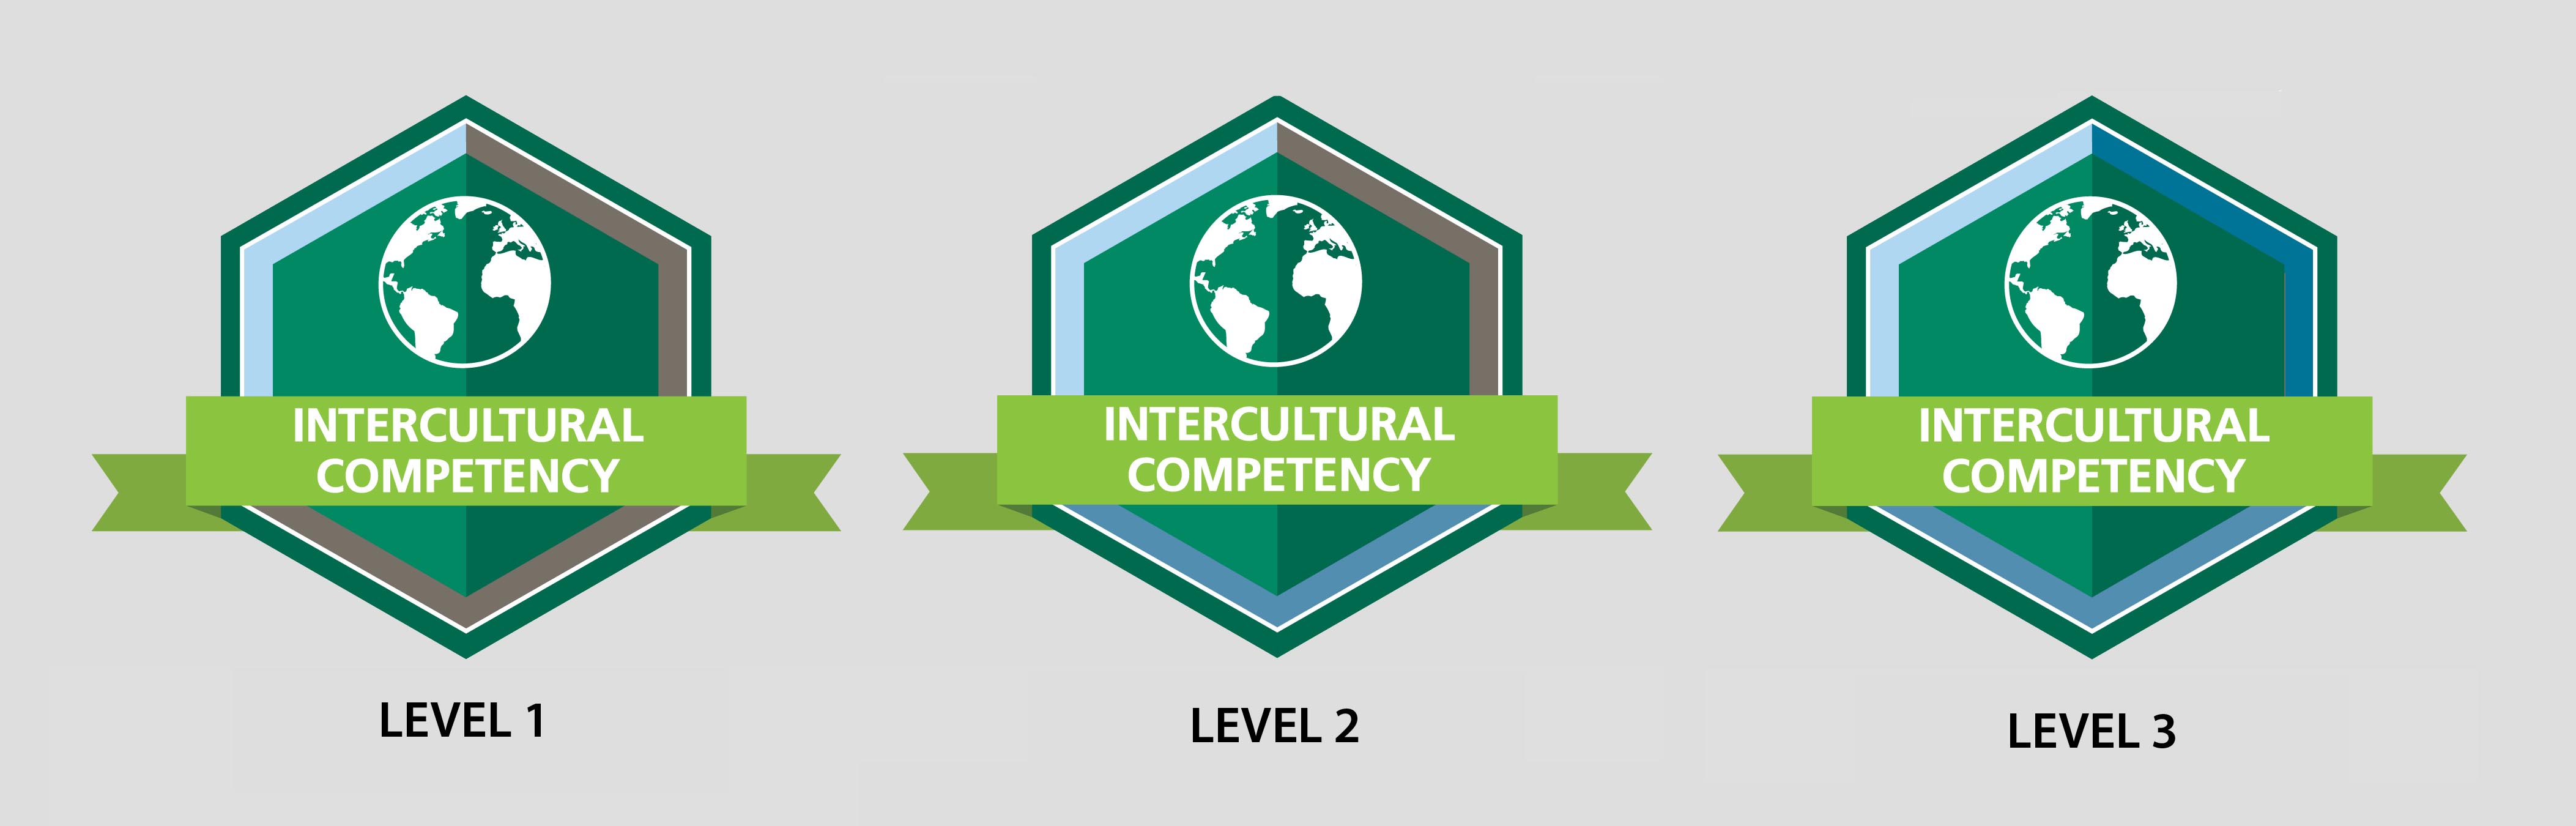 Illustration of the three levels of the microcredential students complete.